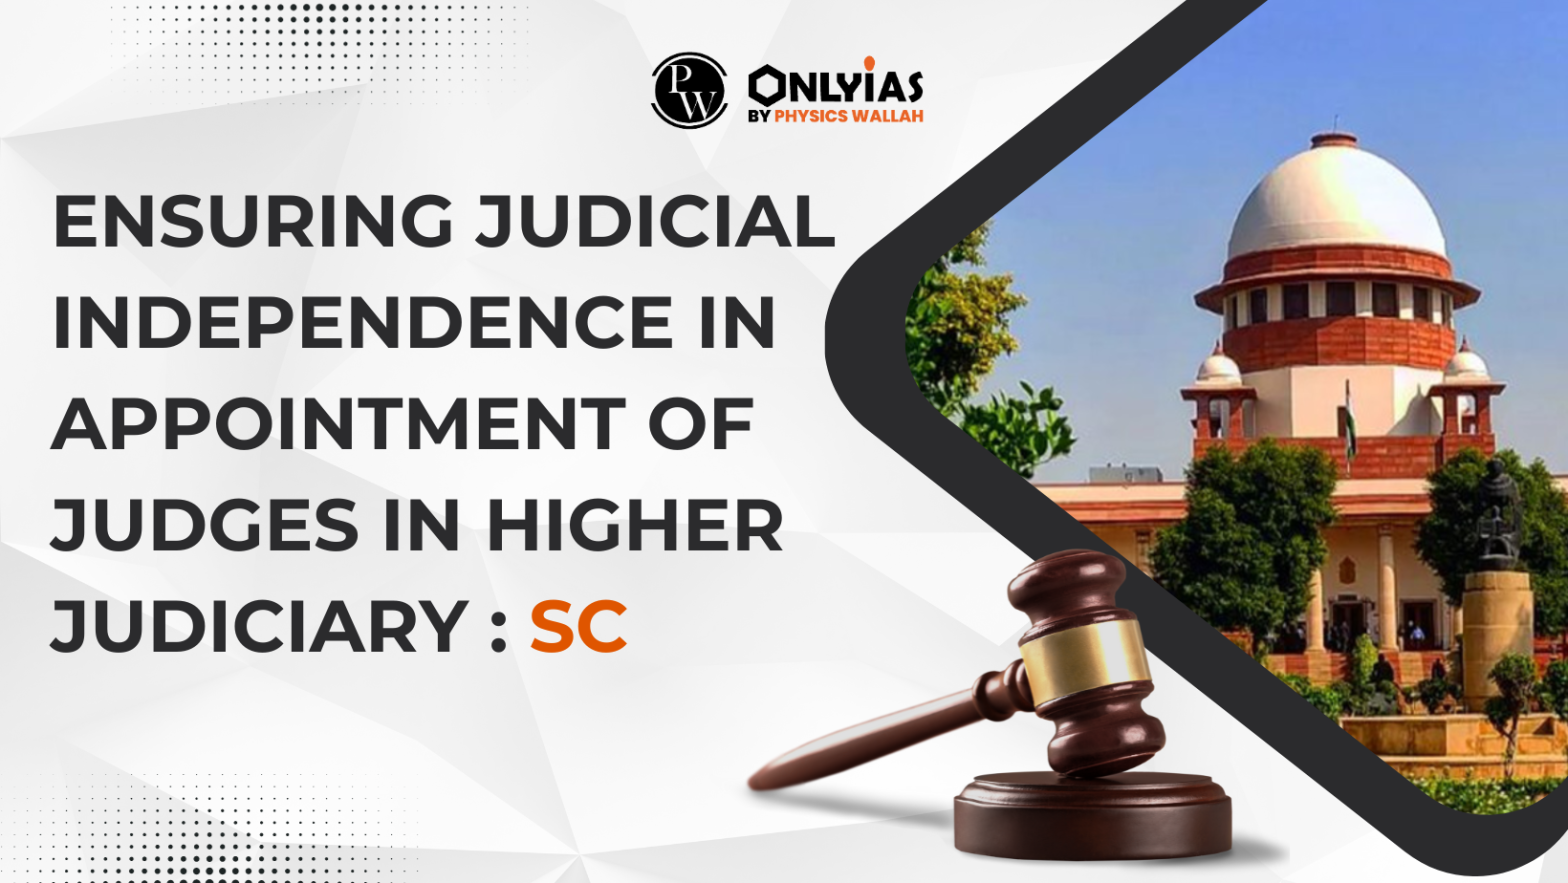 Ensuring Judicial Independence In Appointment of Judges in Higher Judiciary: SC | PWOnlyIAS 2023